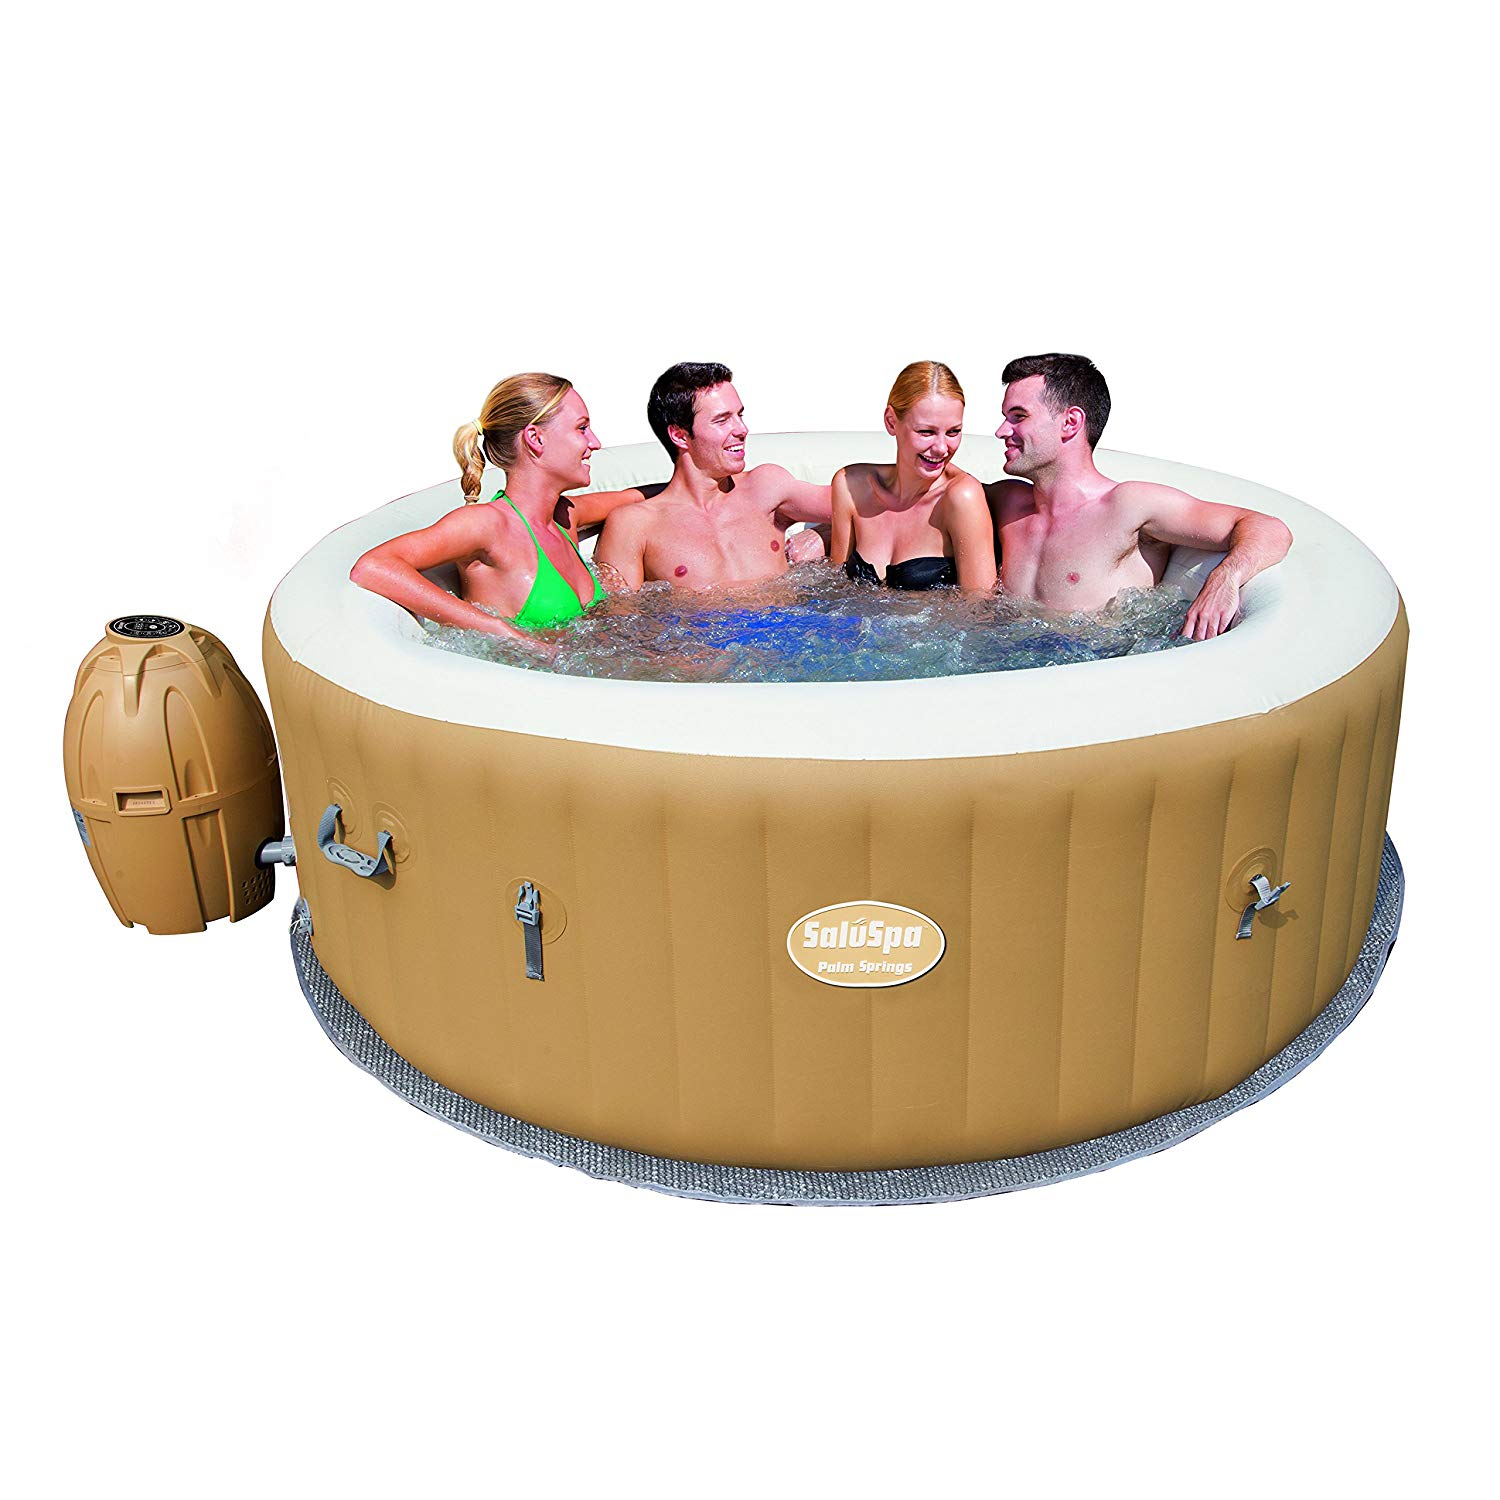 Bestawy Saluspa palm springs airjet inflatable 6-person hot tub